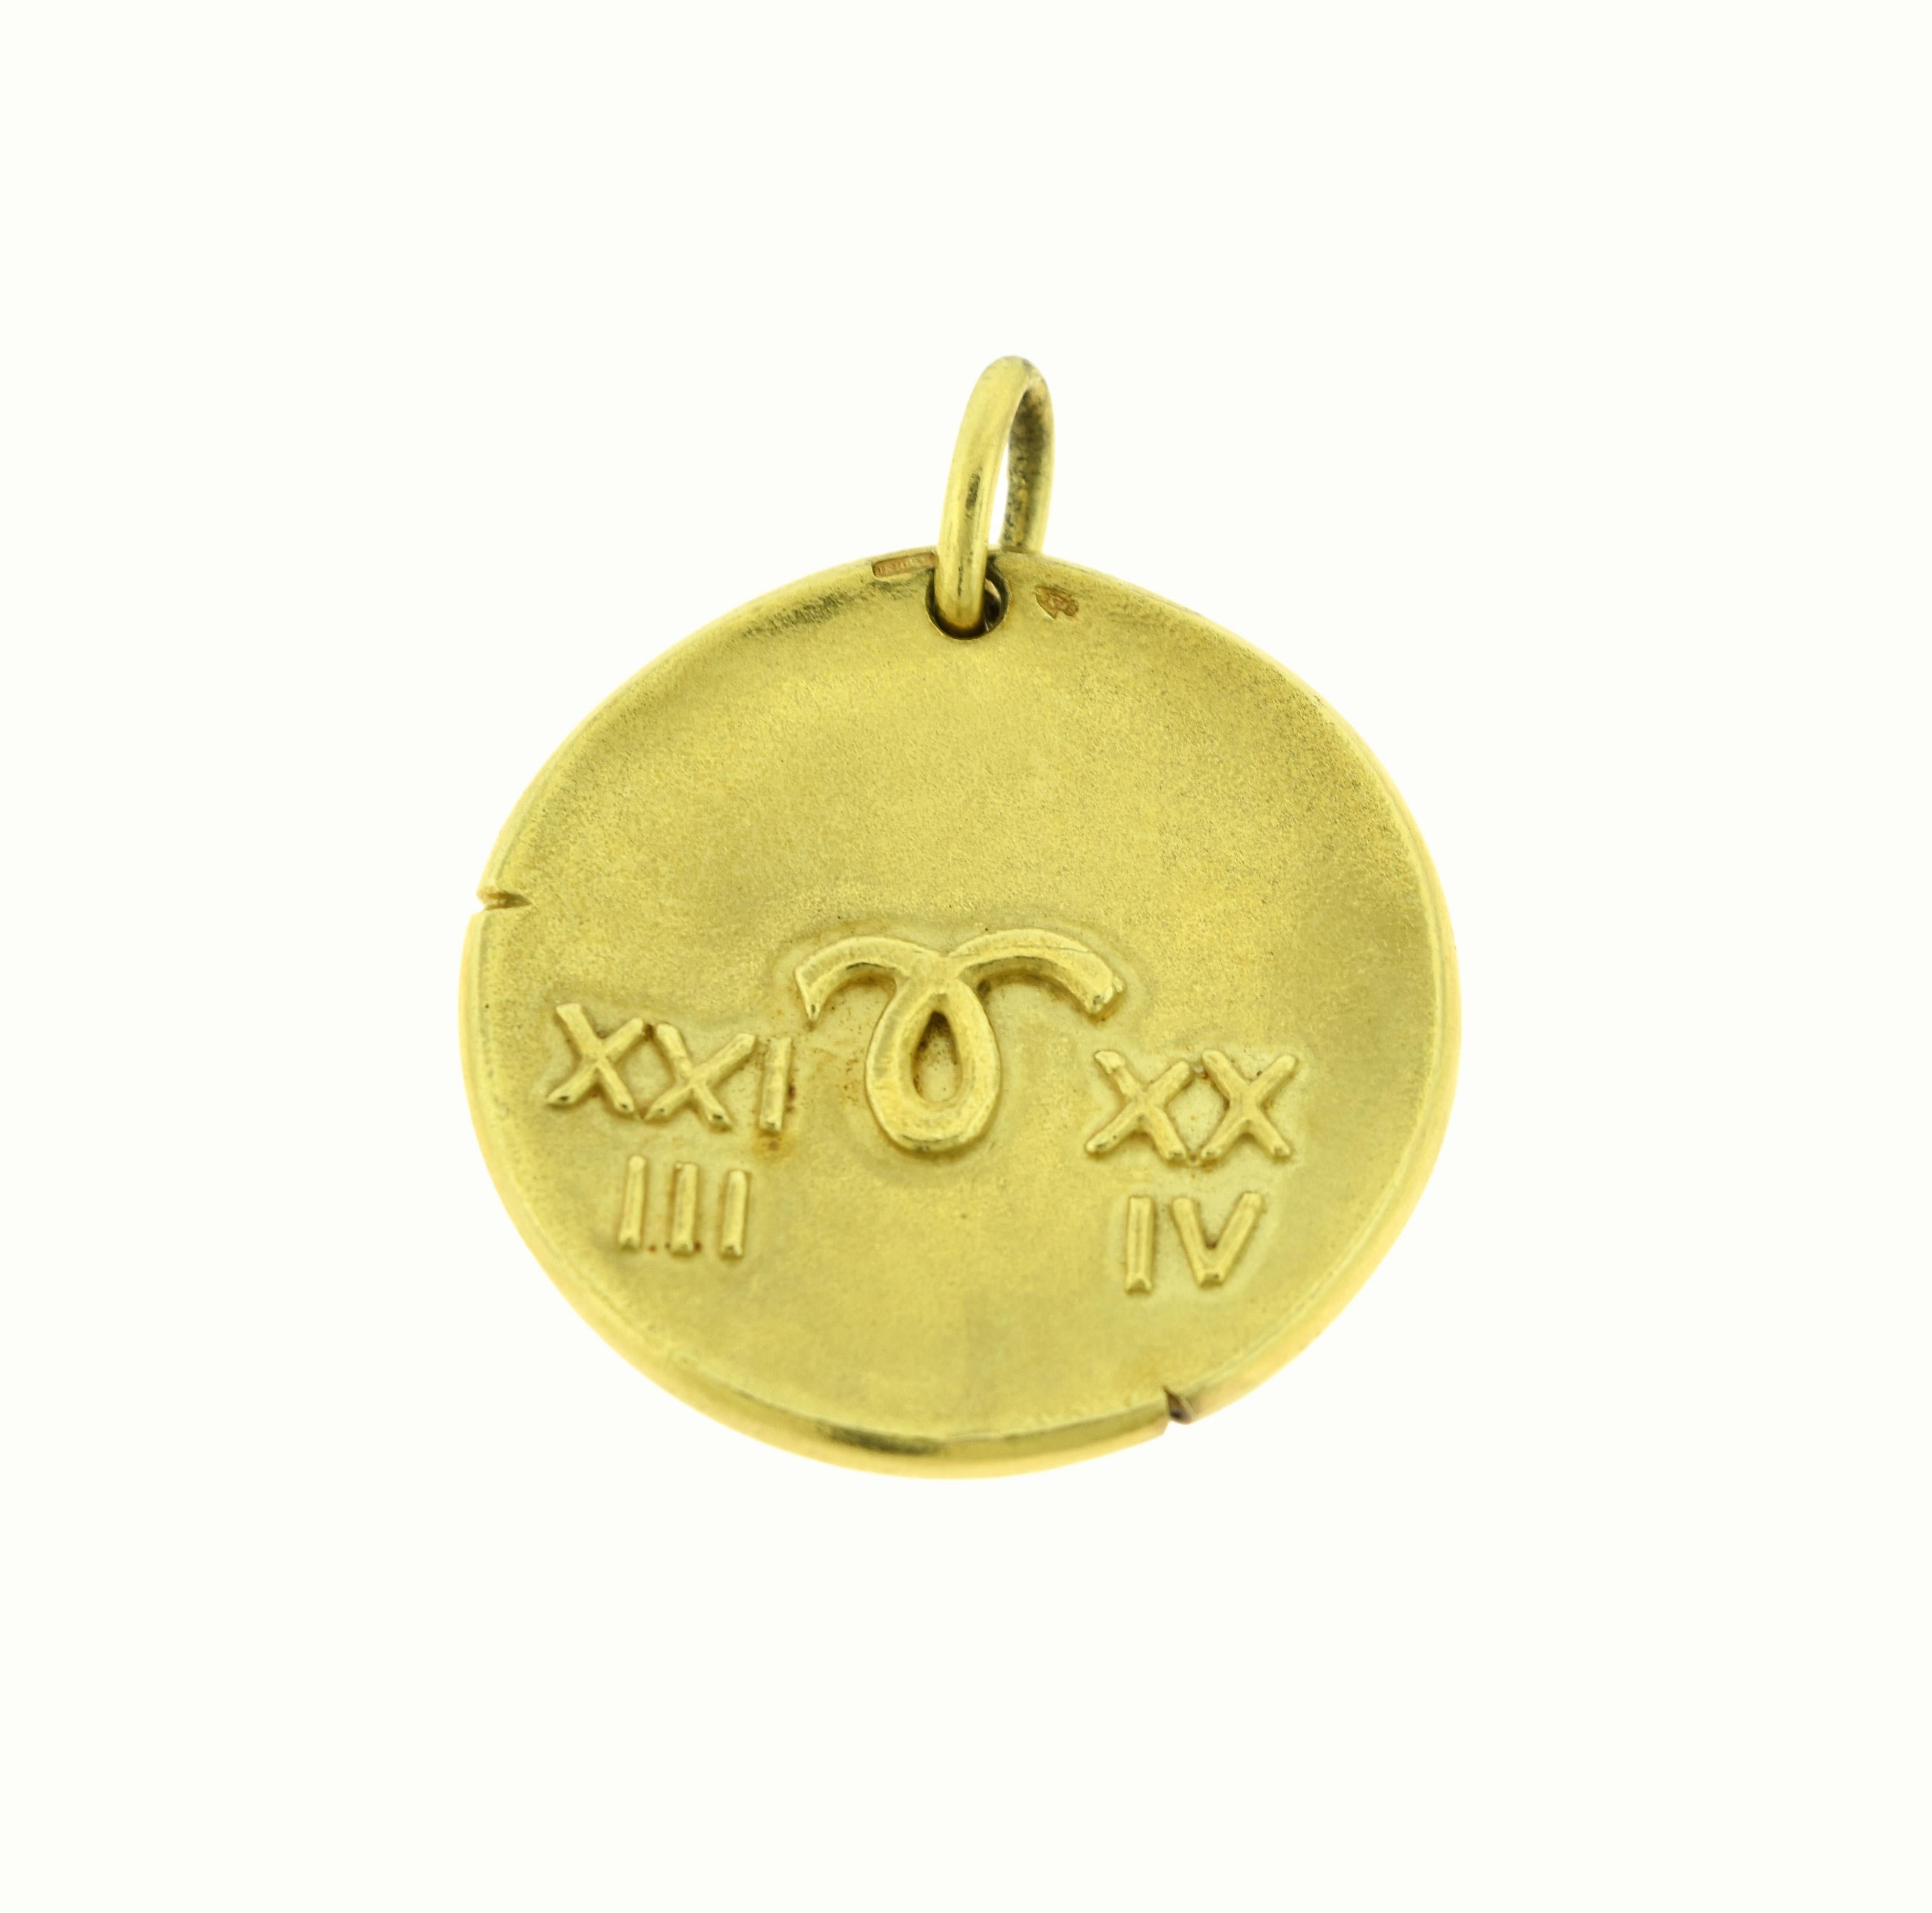 Brilliance Jewels, Miami
Questions? Call Us Anytime!
786,482,8100

Designer: Van Cleef & Arpels 

Style: Pendant/Charm/ Aries Coin

Metal: Yellow Gold   

Metal Purity: 18k    

Pendant Thickness: 3.83mm

Pendant Dimension: 1.75 inches from top to